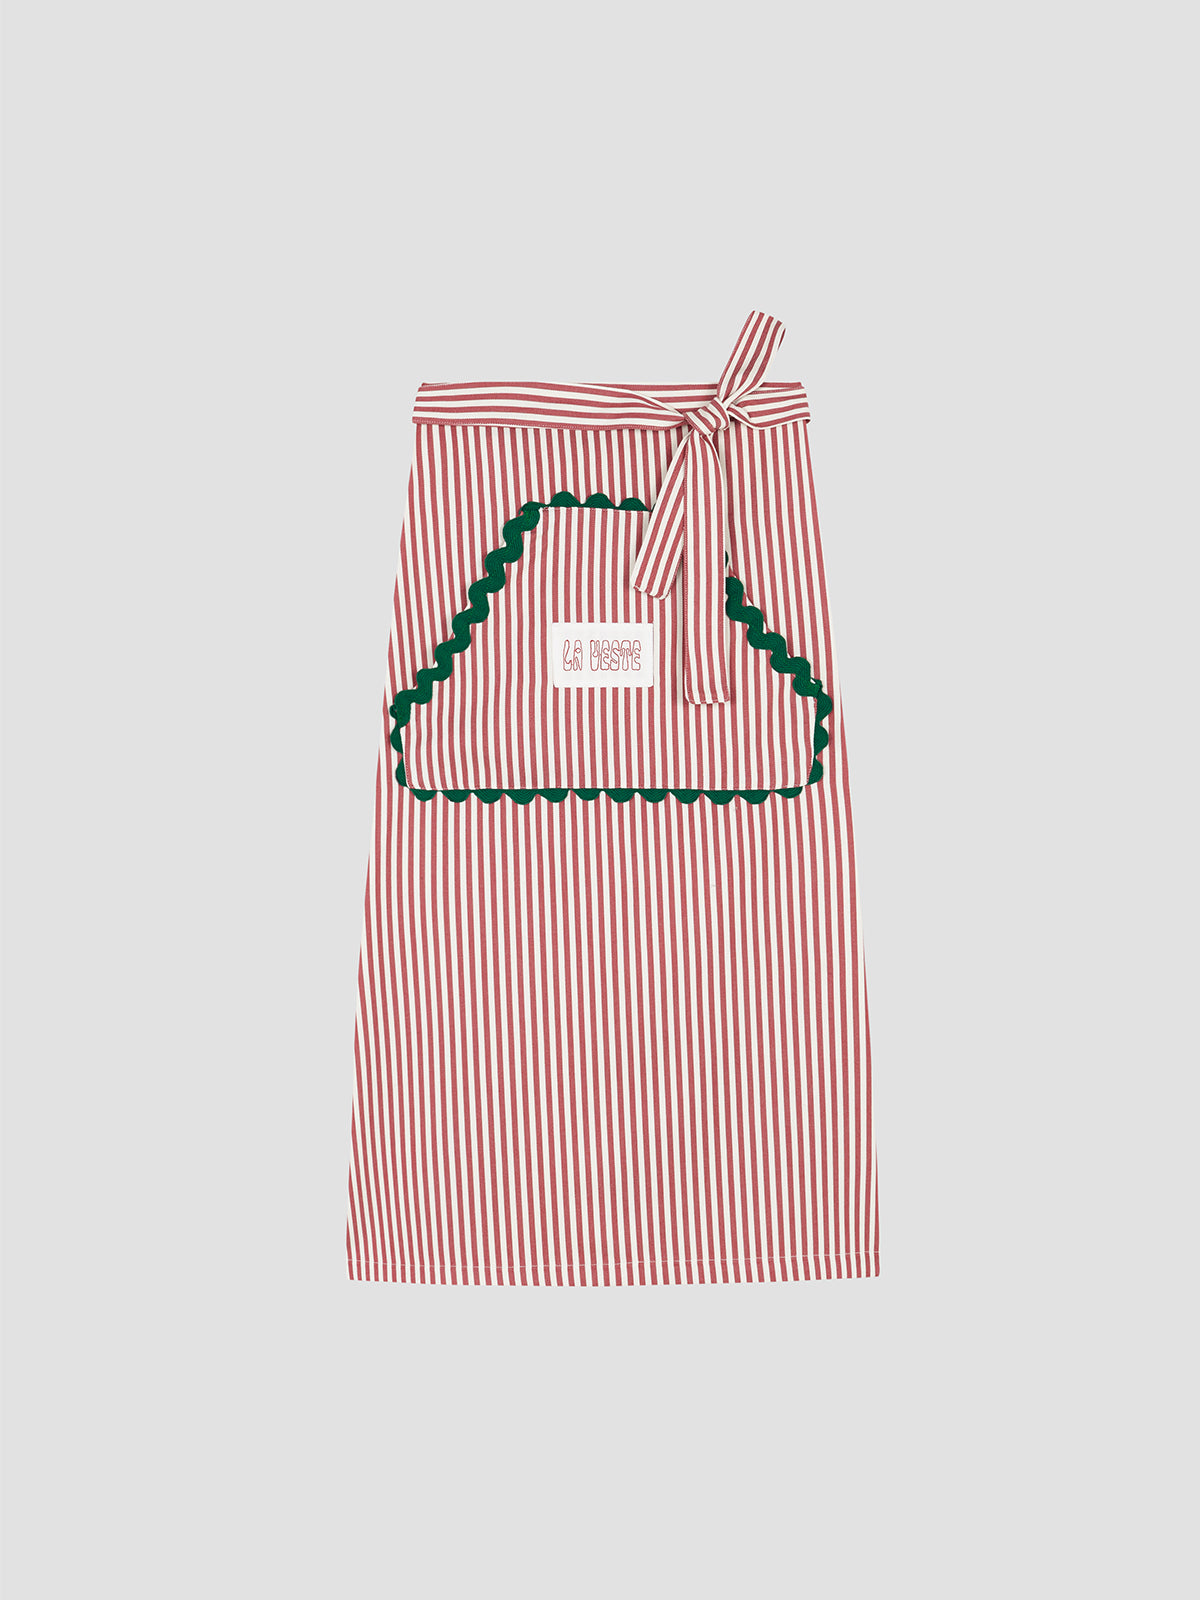 Apron Striped Red is a red and white striped apron with La Veste logo print and matching green rebete detailing